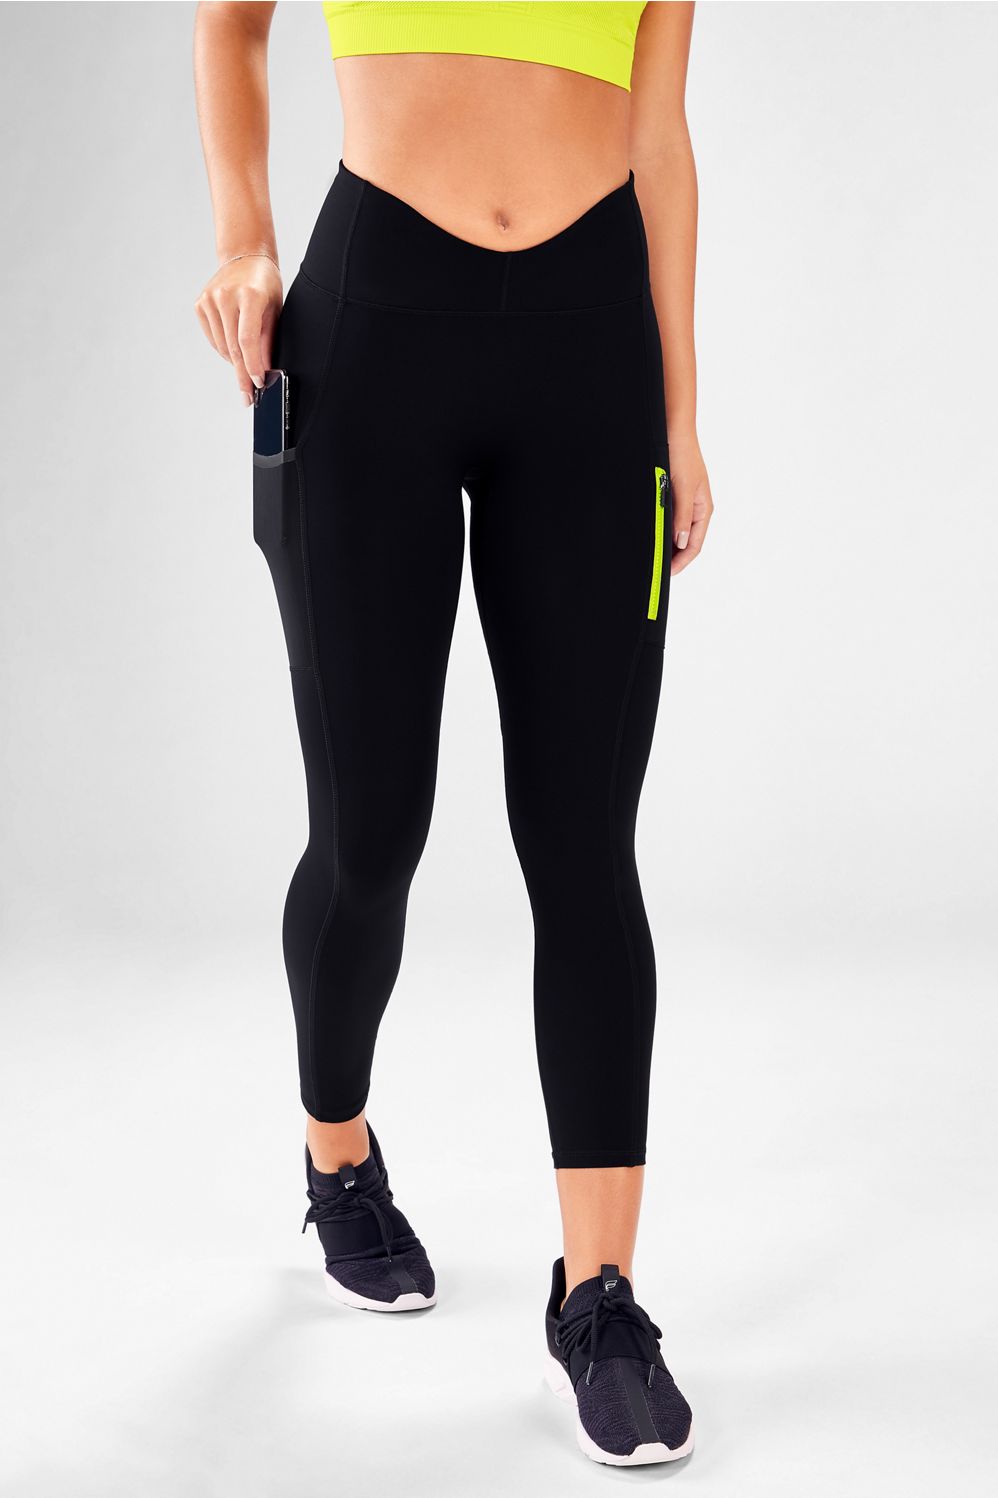 fabletics leggings with pockets